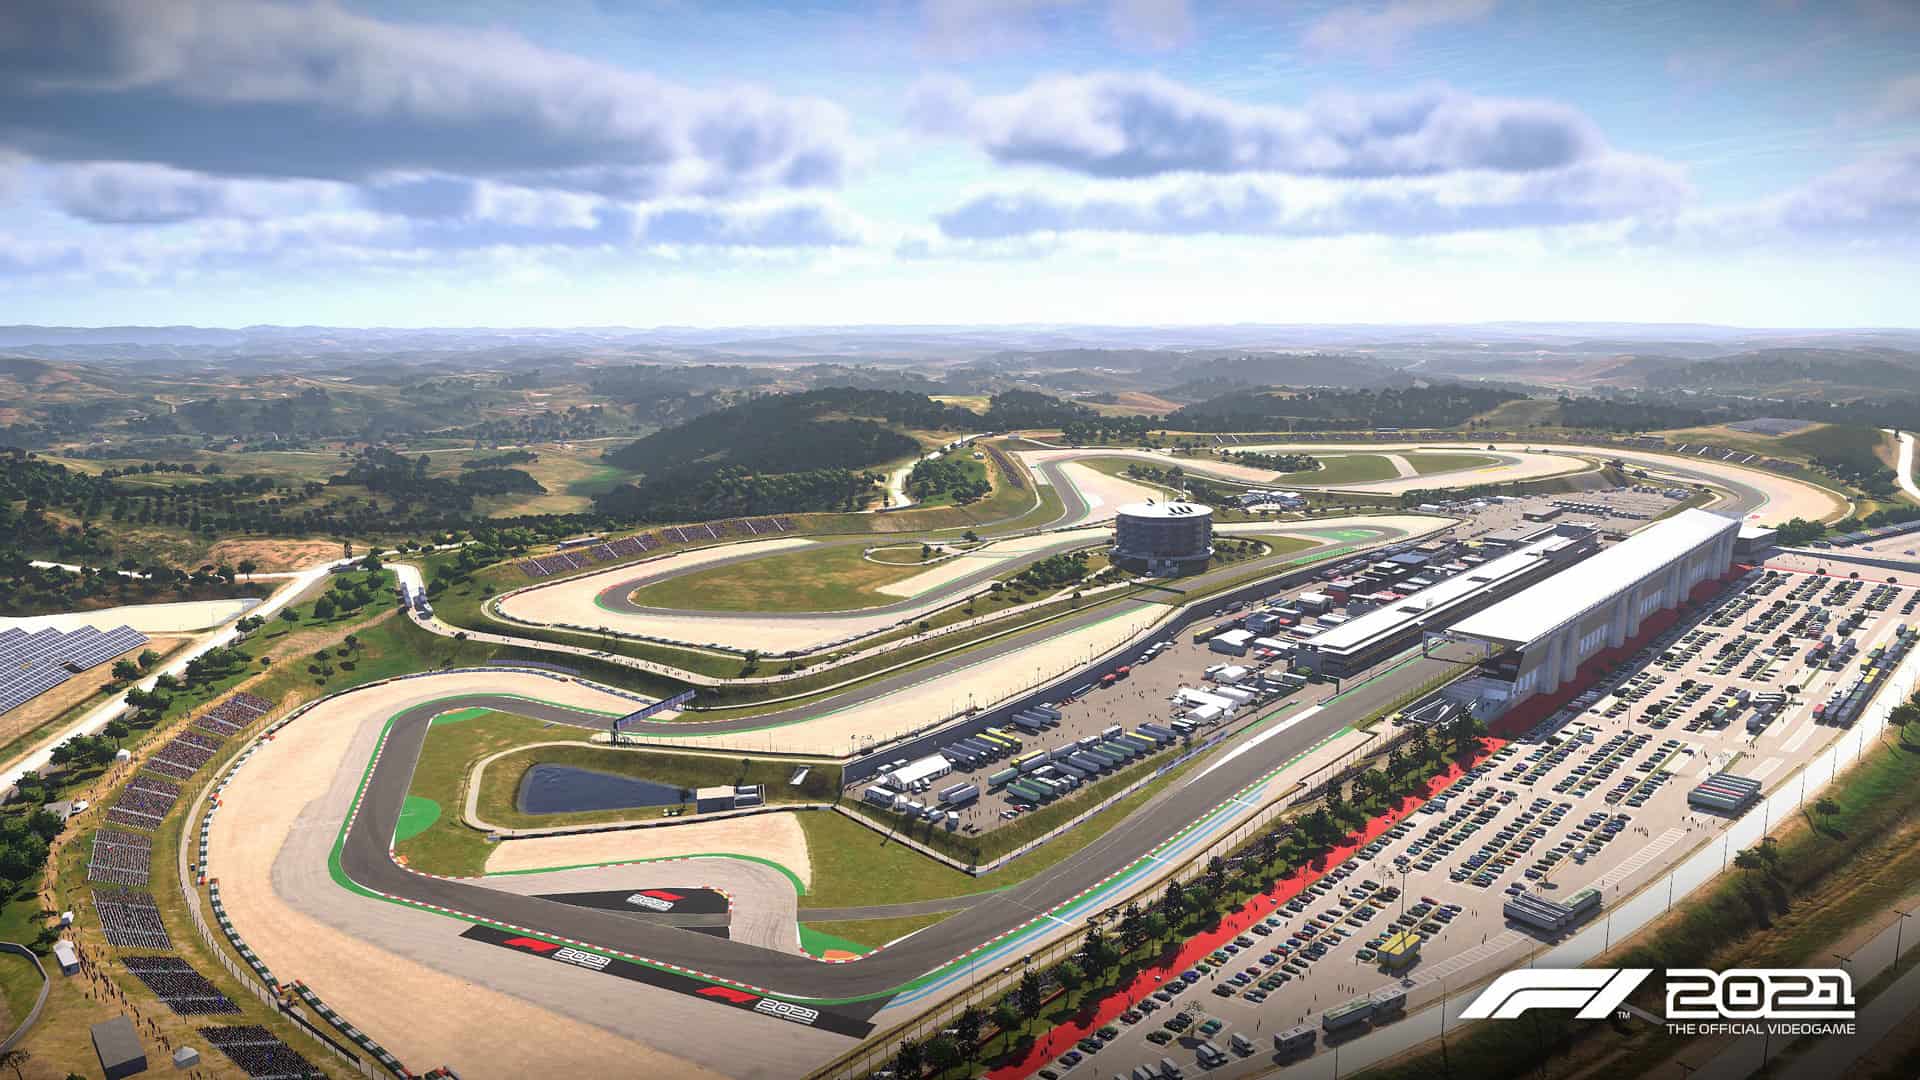 F1 2021 adds new Portimao track in its latest patch